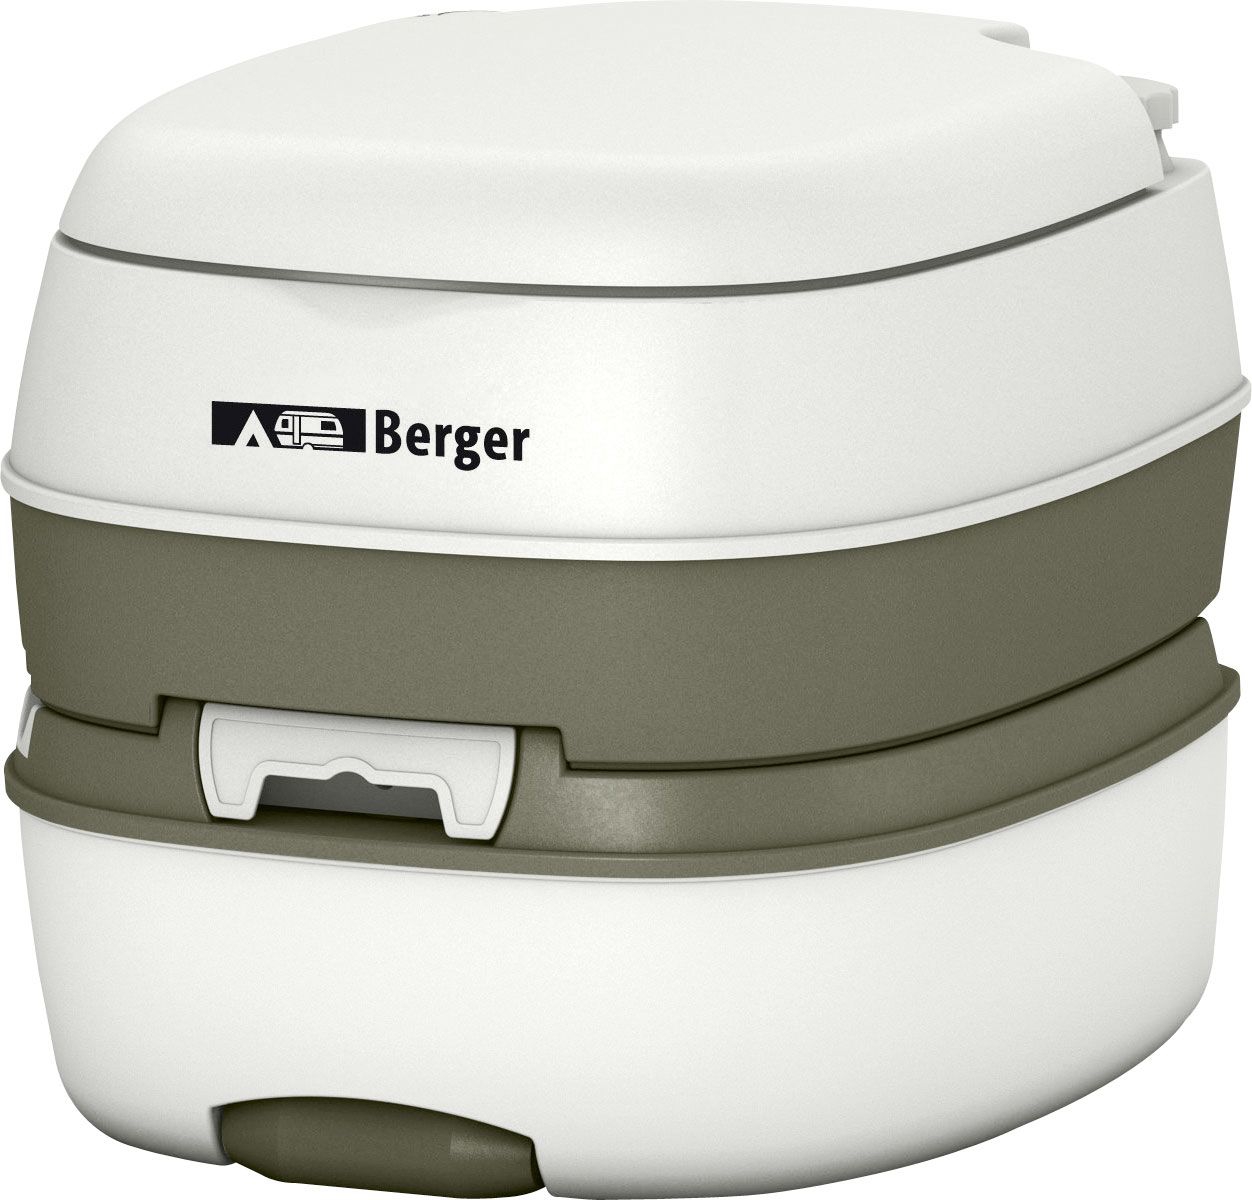 Berger Campingtoilette Mobil WC Deluxe,  AG